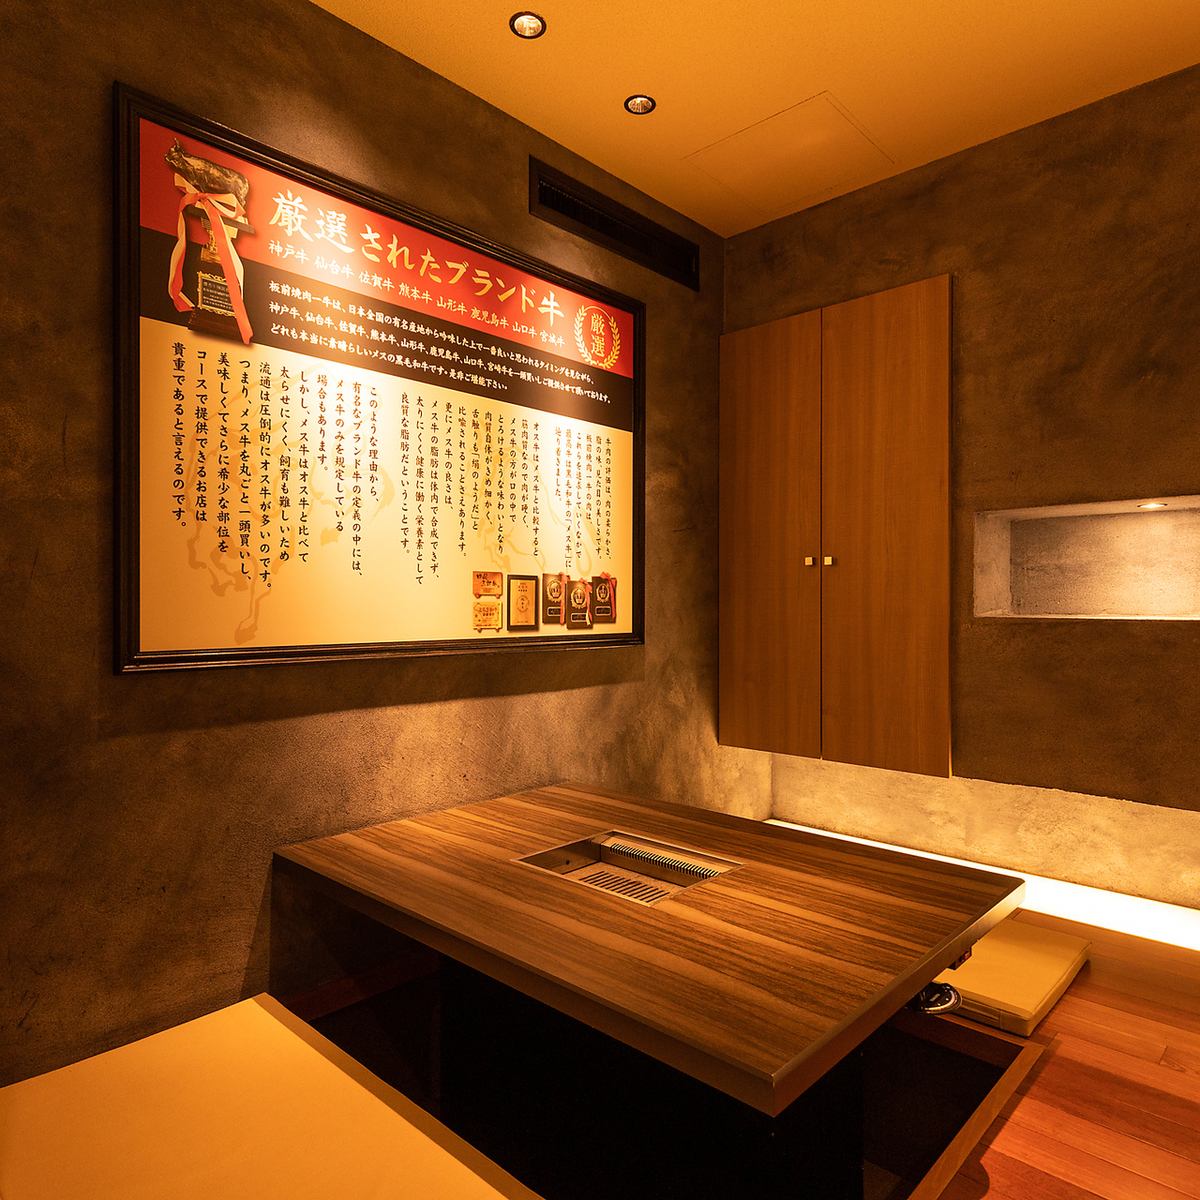 Fully private rooms and couple seats available! Enjoy the finest yakiniku slowly!